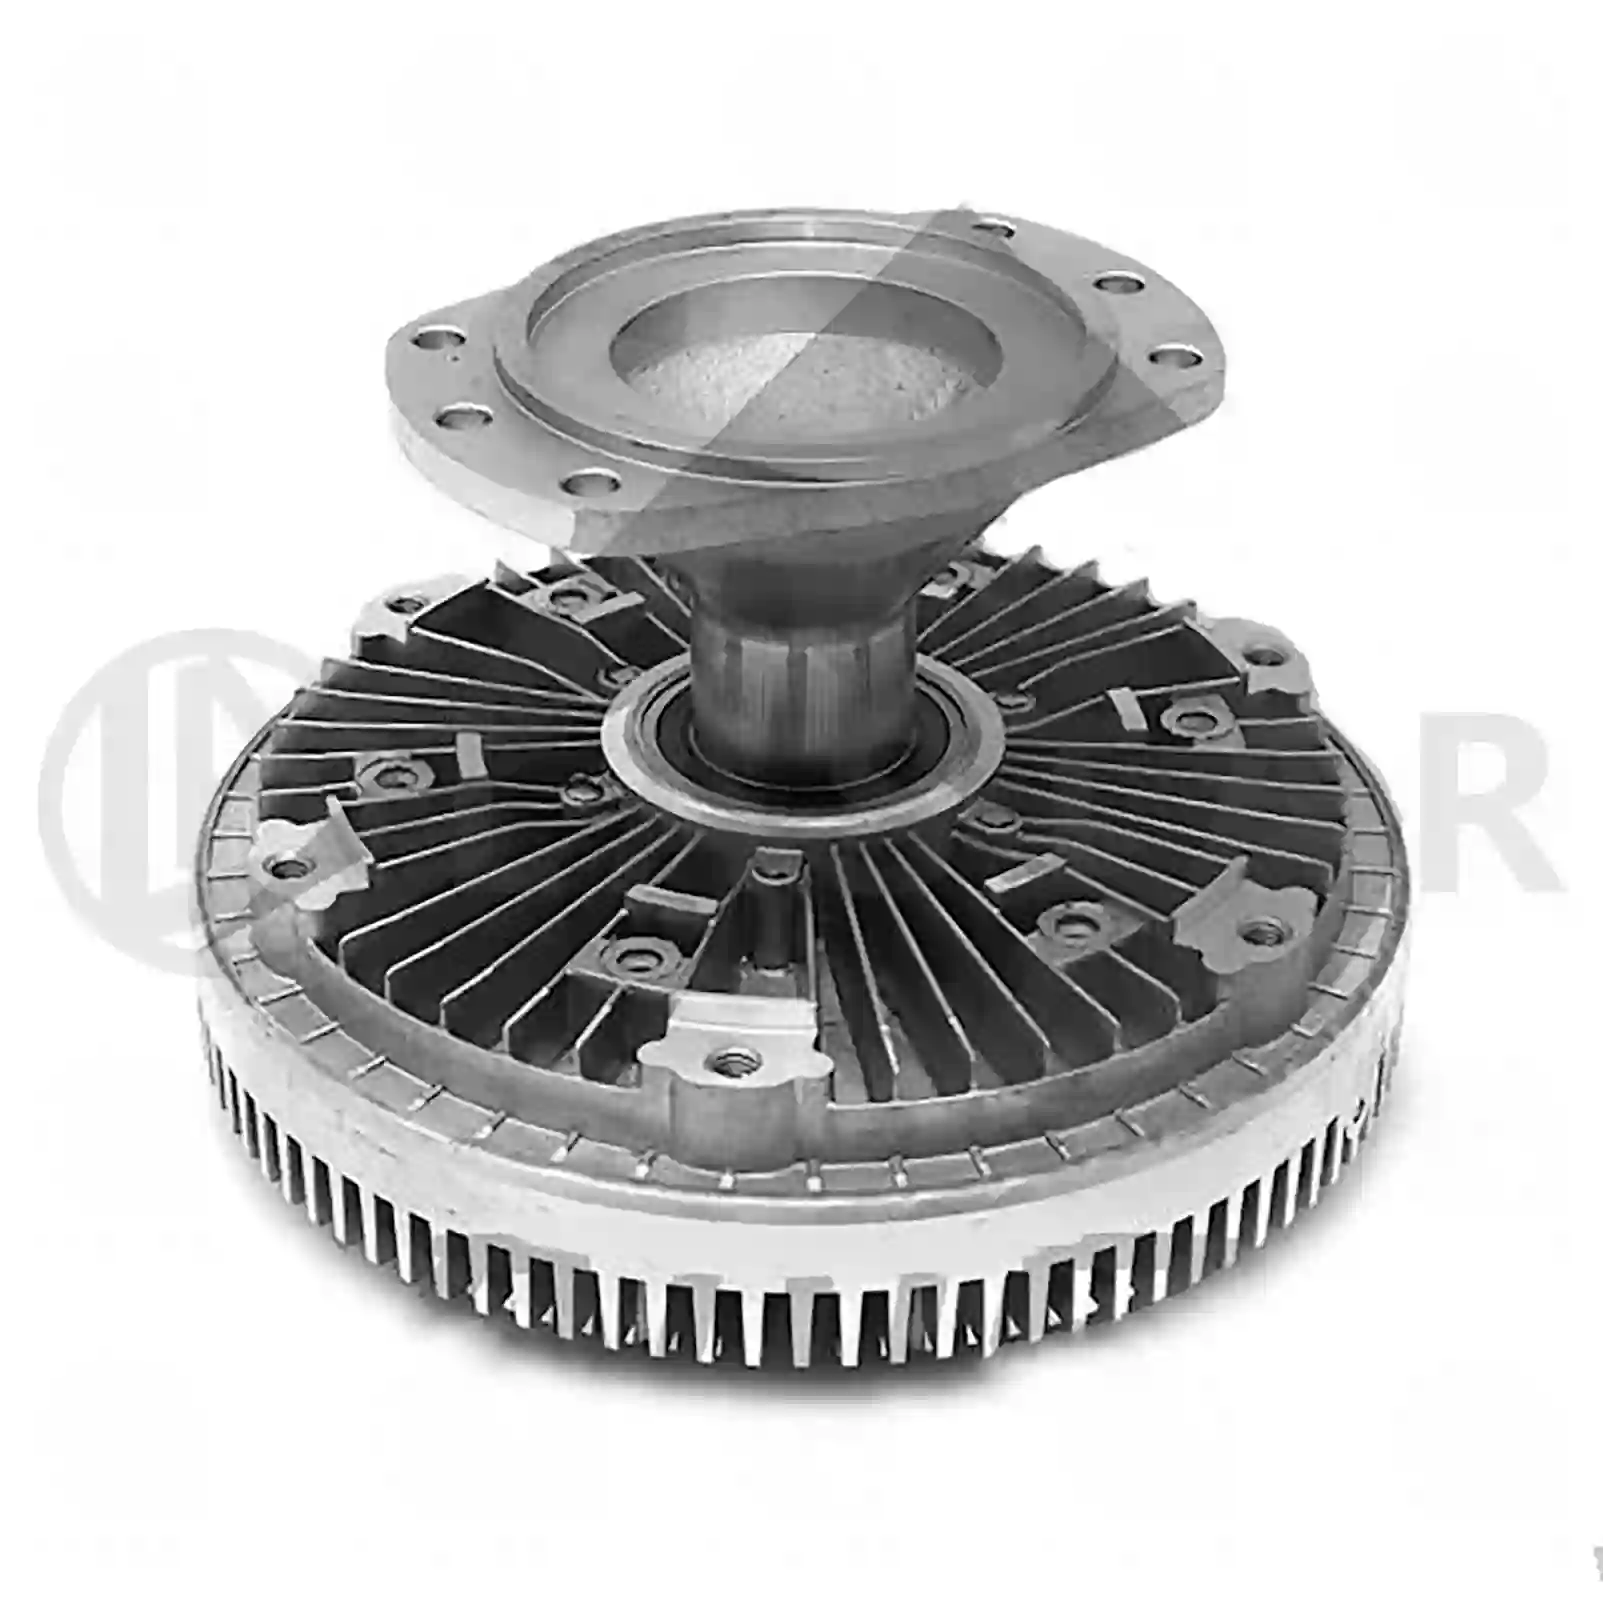 Fan clutch, 77708641, 1306778, 1376148 ||  77708641 Lastar Spare Part | Truck Spare Parts, Auotomotive Spare Parts Fan clutch, 77708641, 1306778, 1376148 ||  77708641 Lastar Spare Part | Truck Spare Parts, Auotomotive Spare Parts